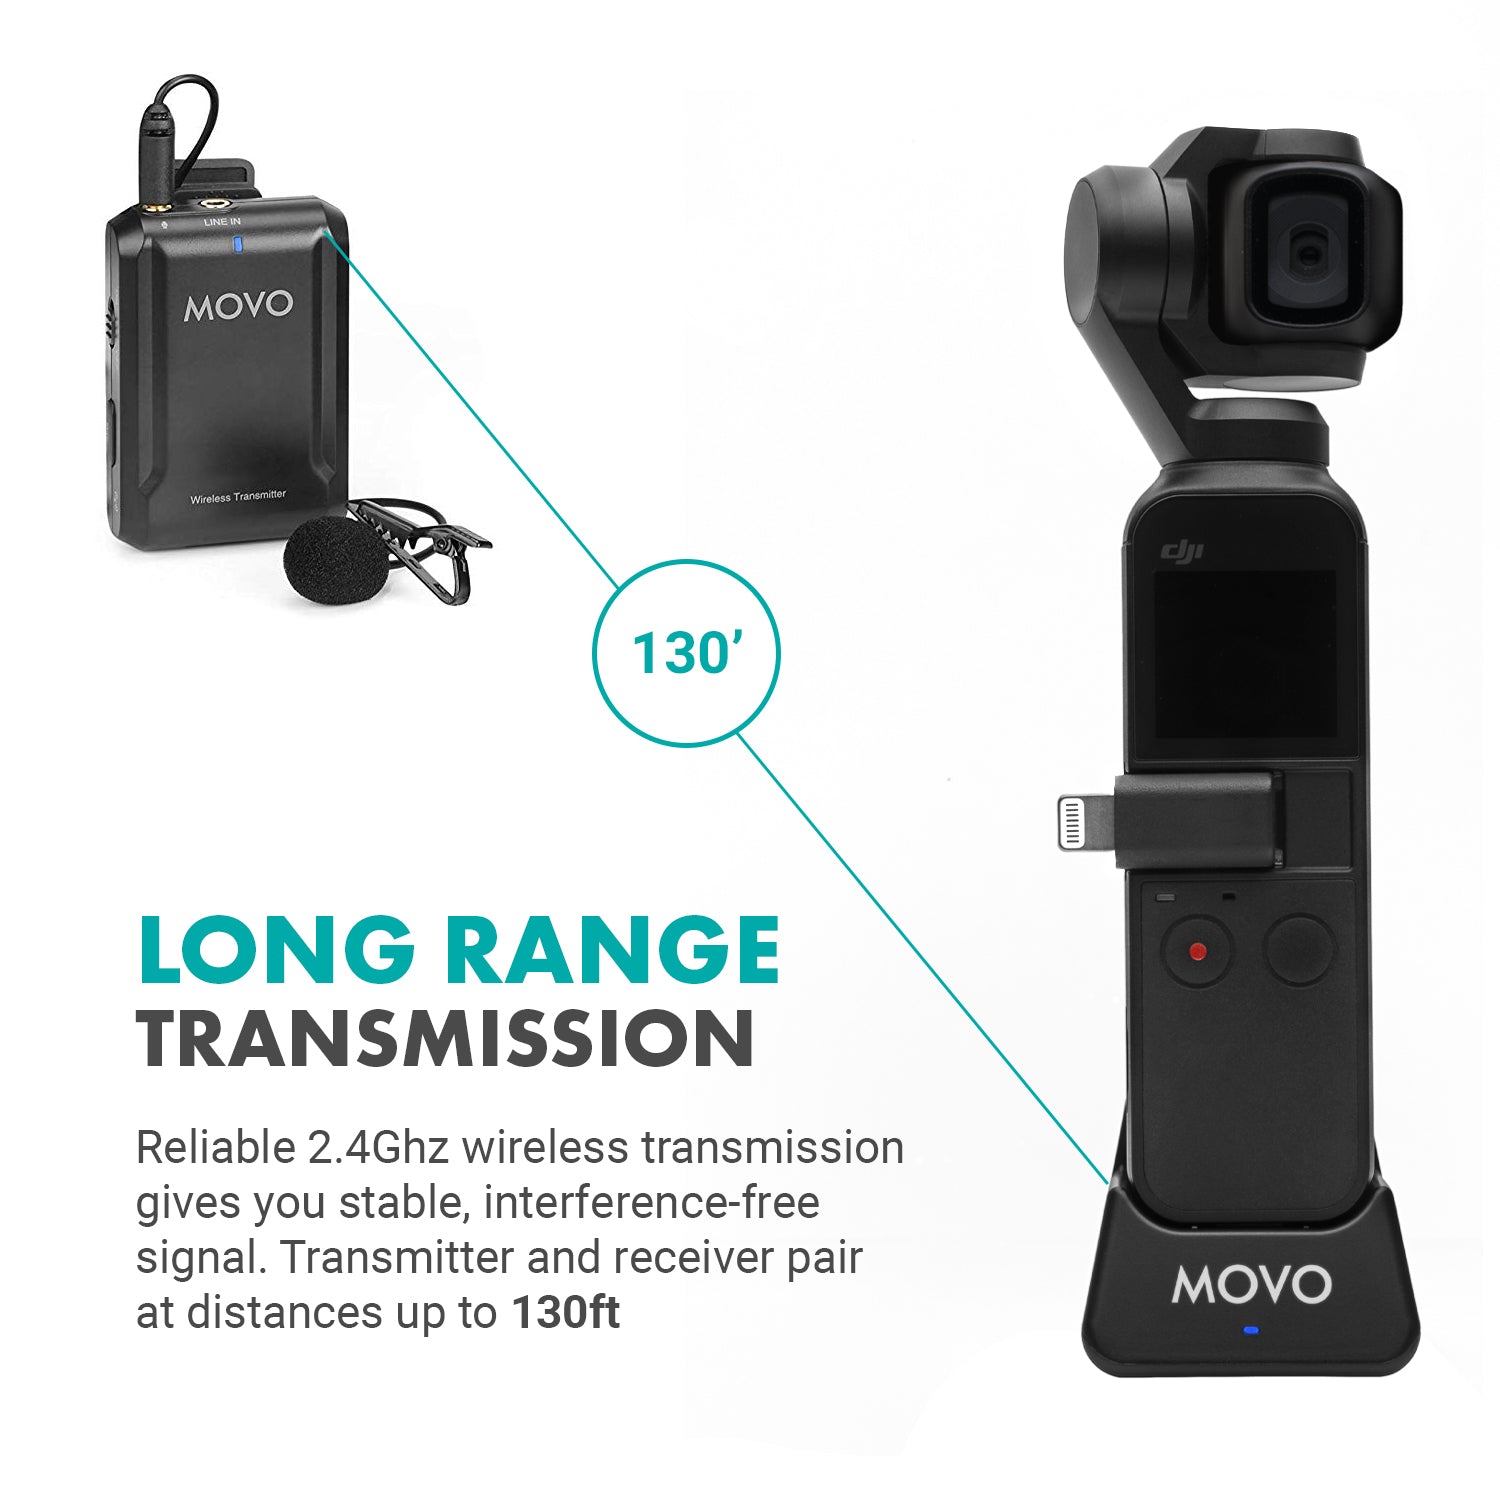 EDGE-DI-DUO, Dual Wireless Microphone System for iPhone